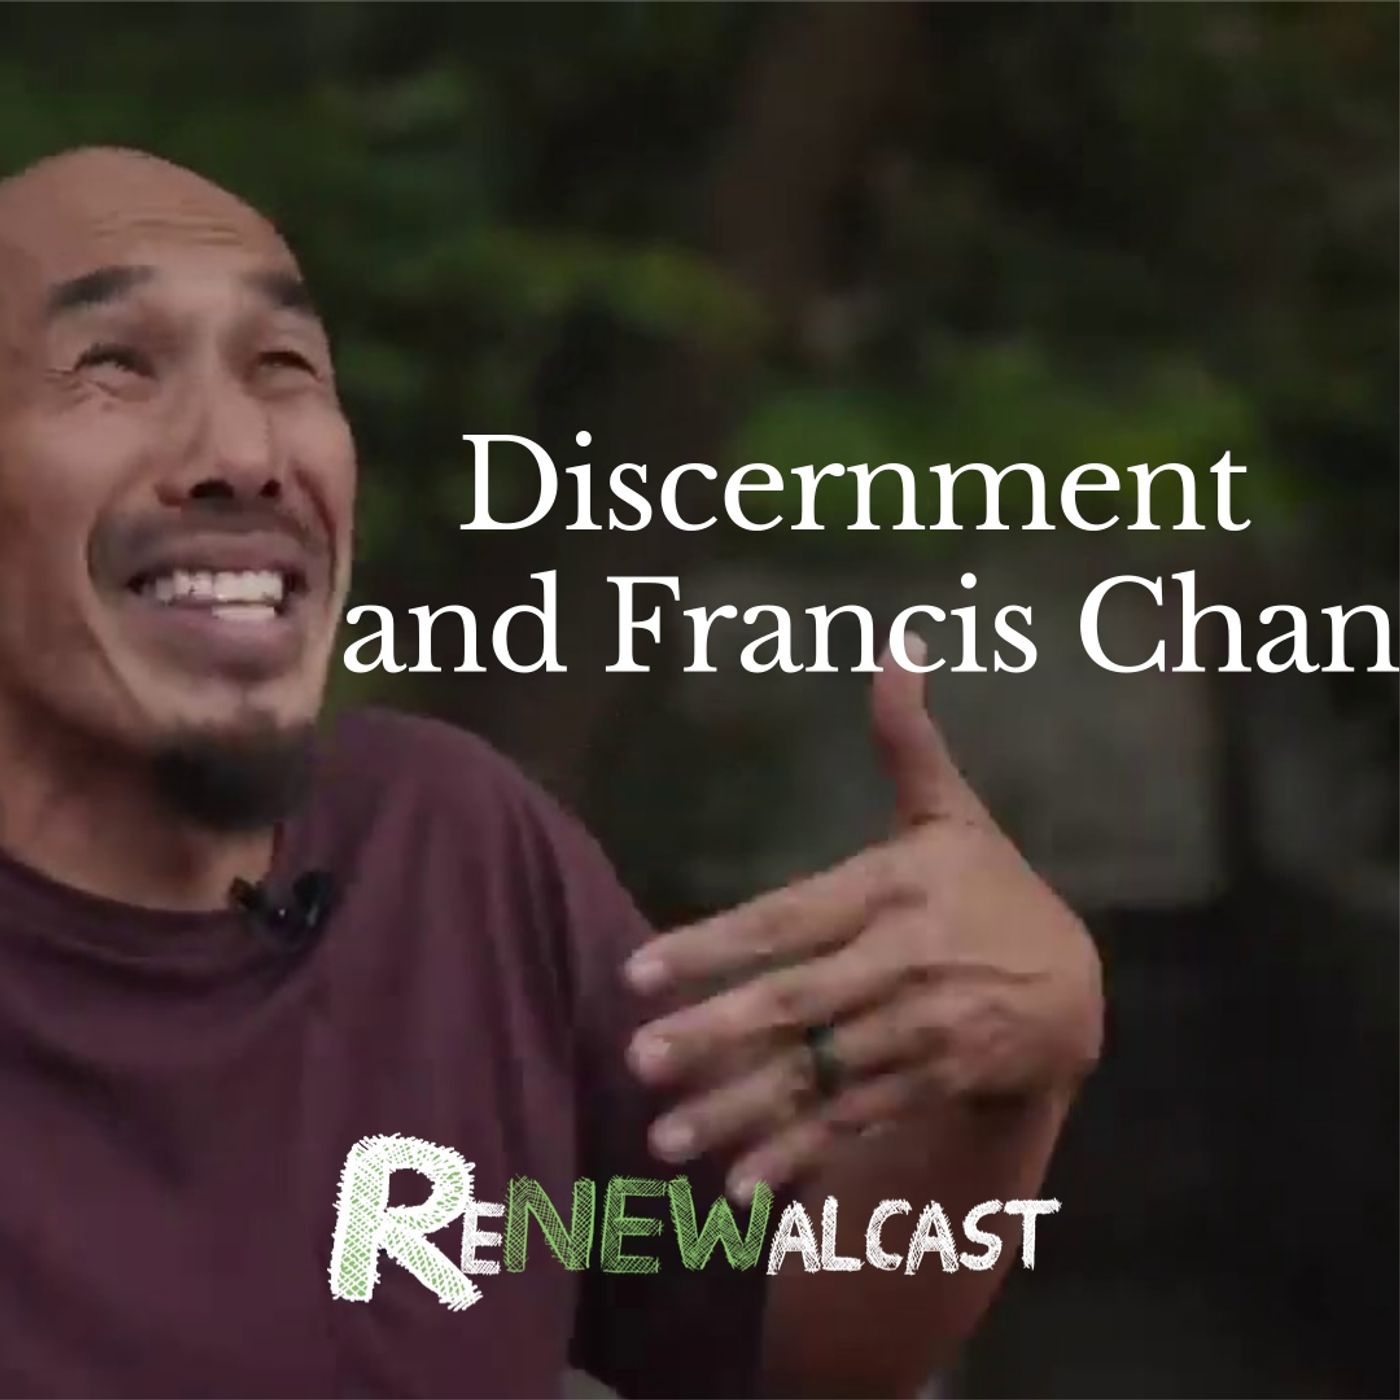 Discernment and Francis Chan